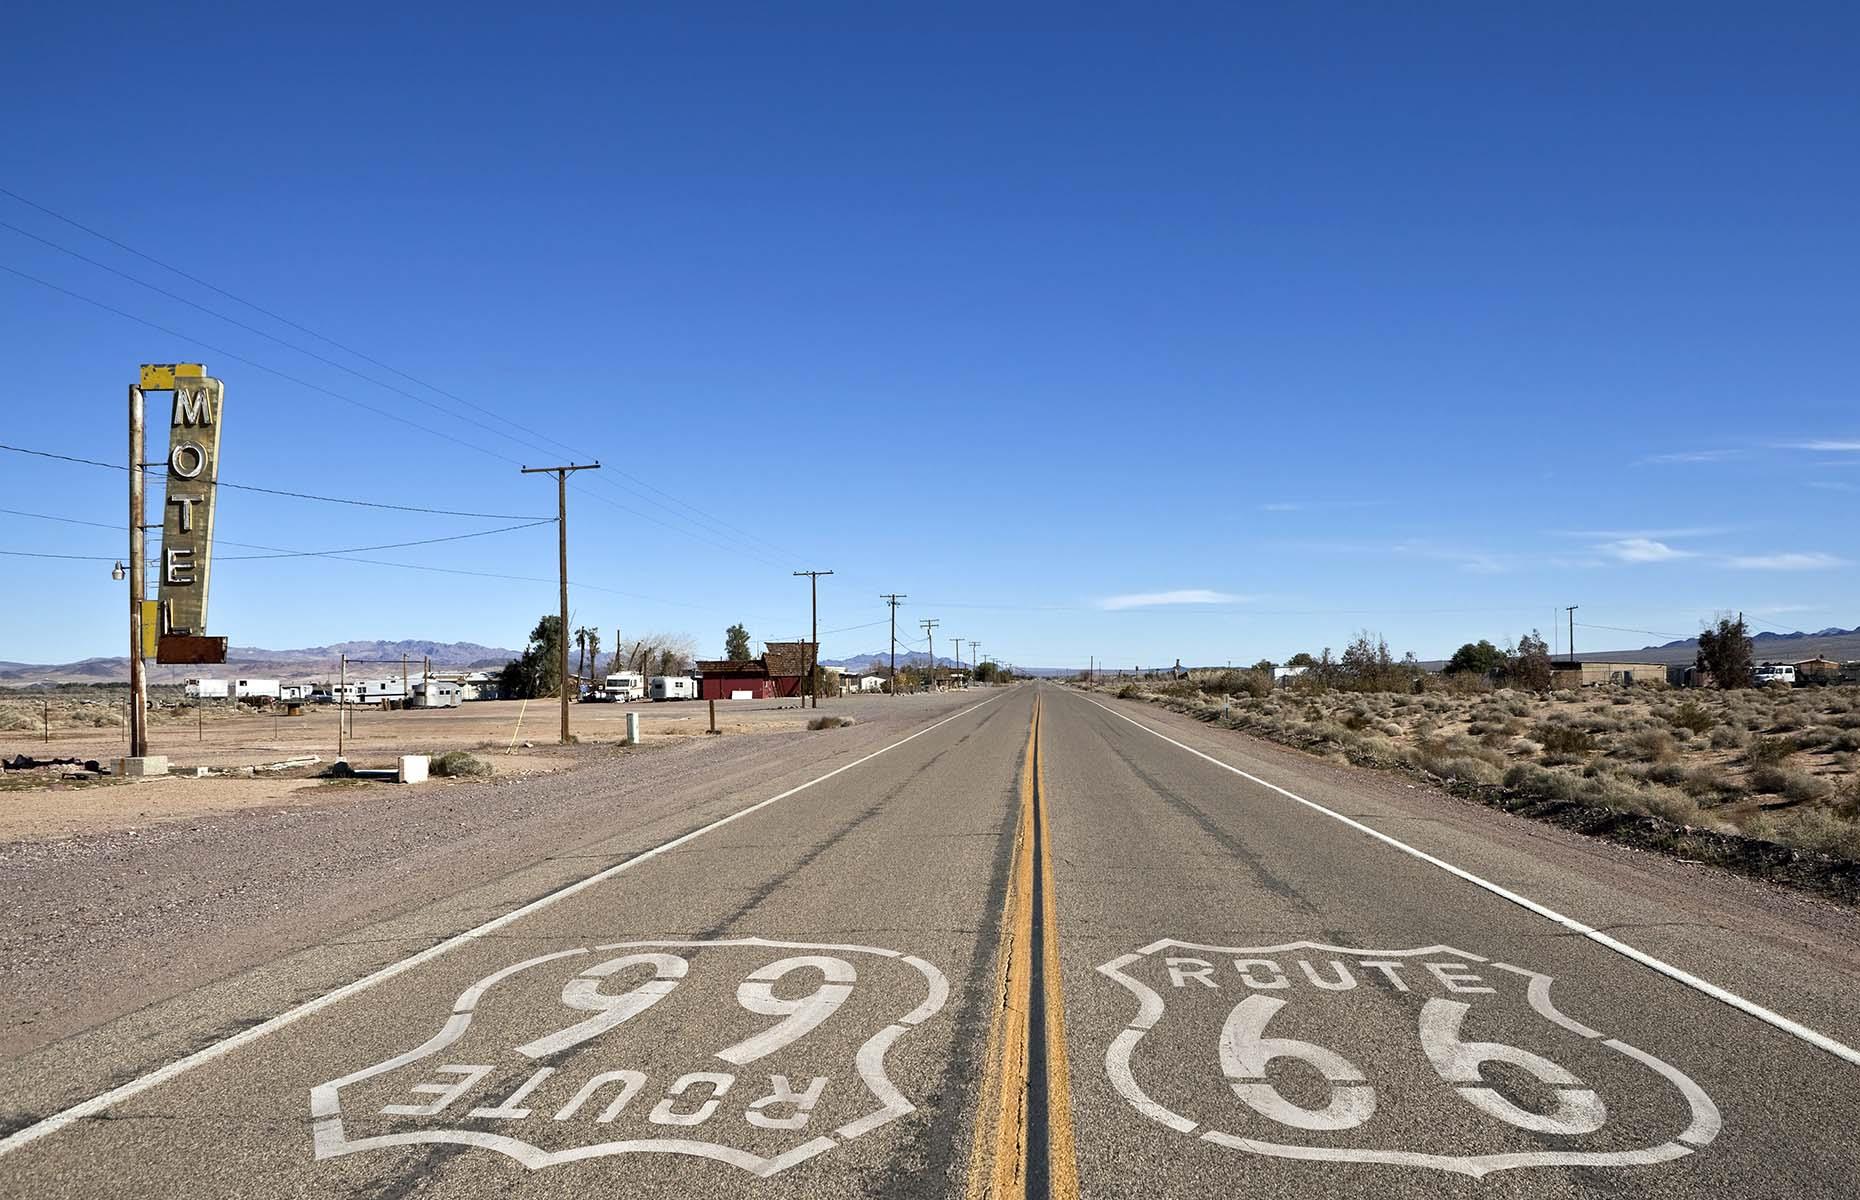 <p>More than 300 miles (483km) of the Mother Road belong to California and arguably <a href="https://www.visitgreaterpalmsprings.com/blog/post/tracing-the-mother-road-from-needles-to-barstow/">its best section</a> within the state is the stretch between Needles and Barstow. Extending for just over 140 miles (225km), the road grazes the southern border of the Mojave National Preserve and travels through several small historic towns. It also connects travelers with the mountains, sand dunes and hiking trails of the Mojave Trails National Monument.</p>